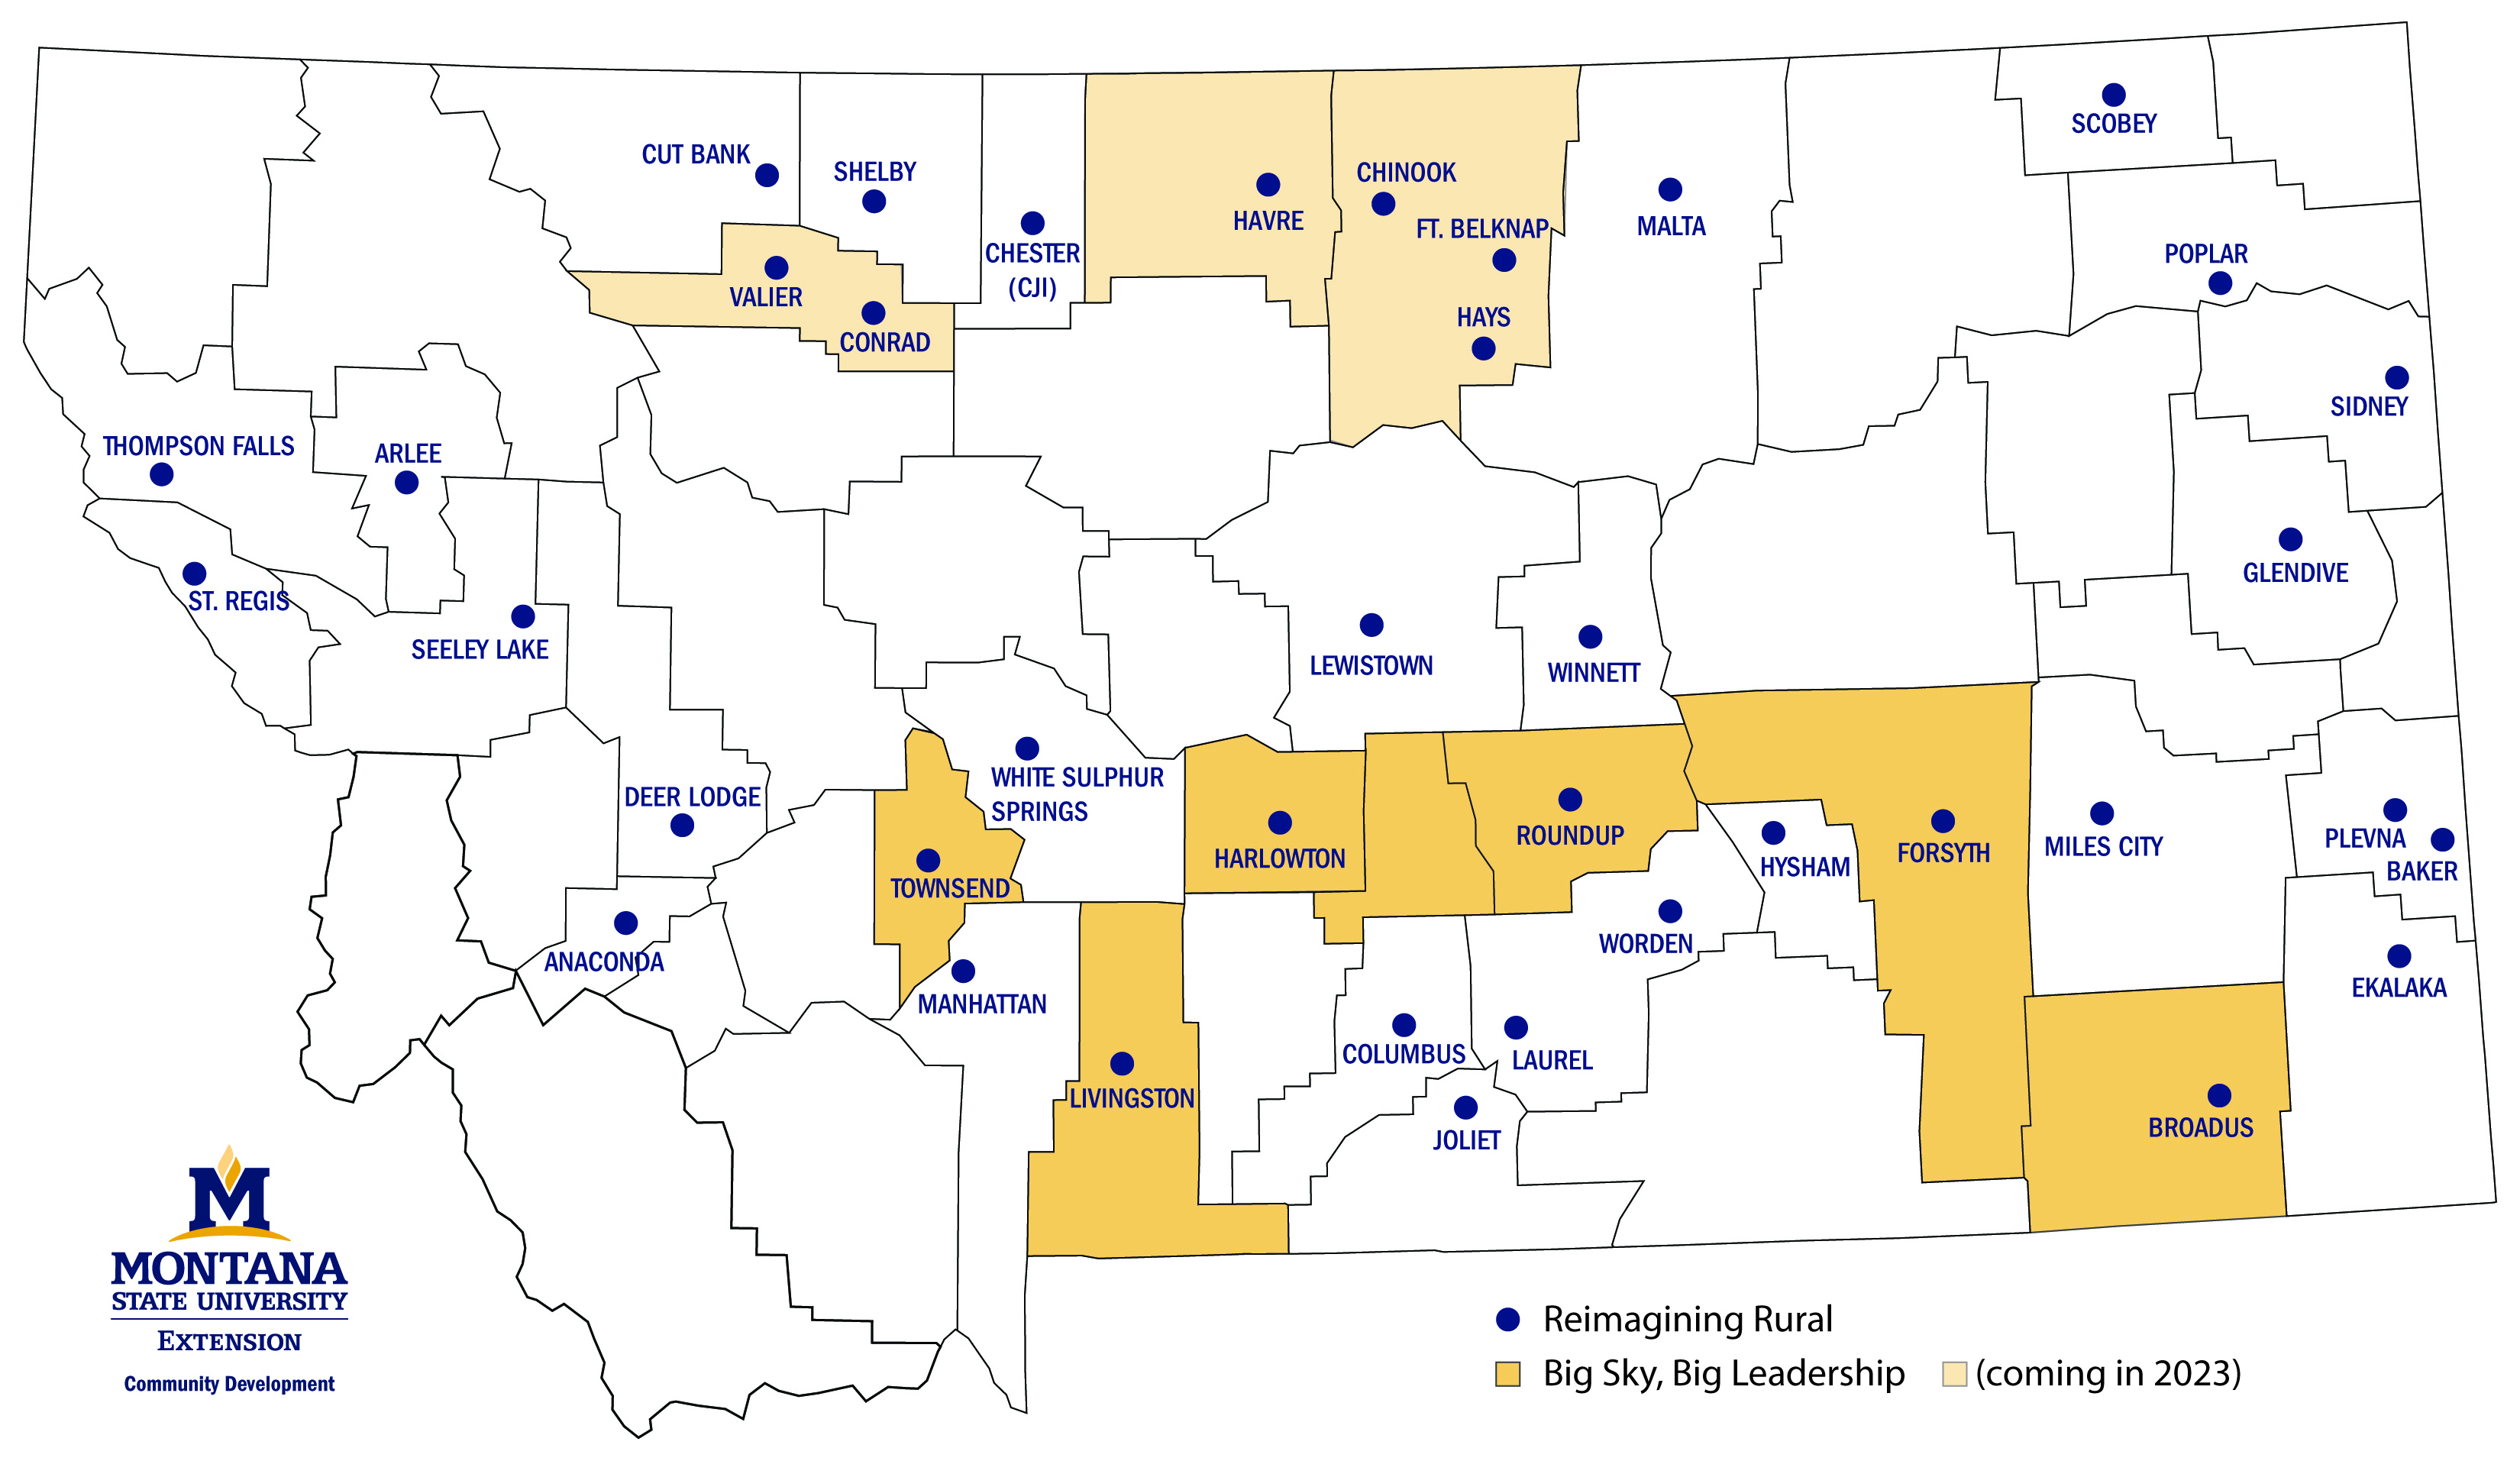 Outline of state of Montana with dots for Reimagining Rural communities and counties where BSBL is hosted.